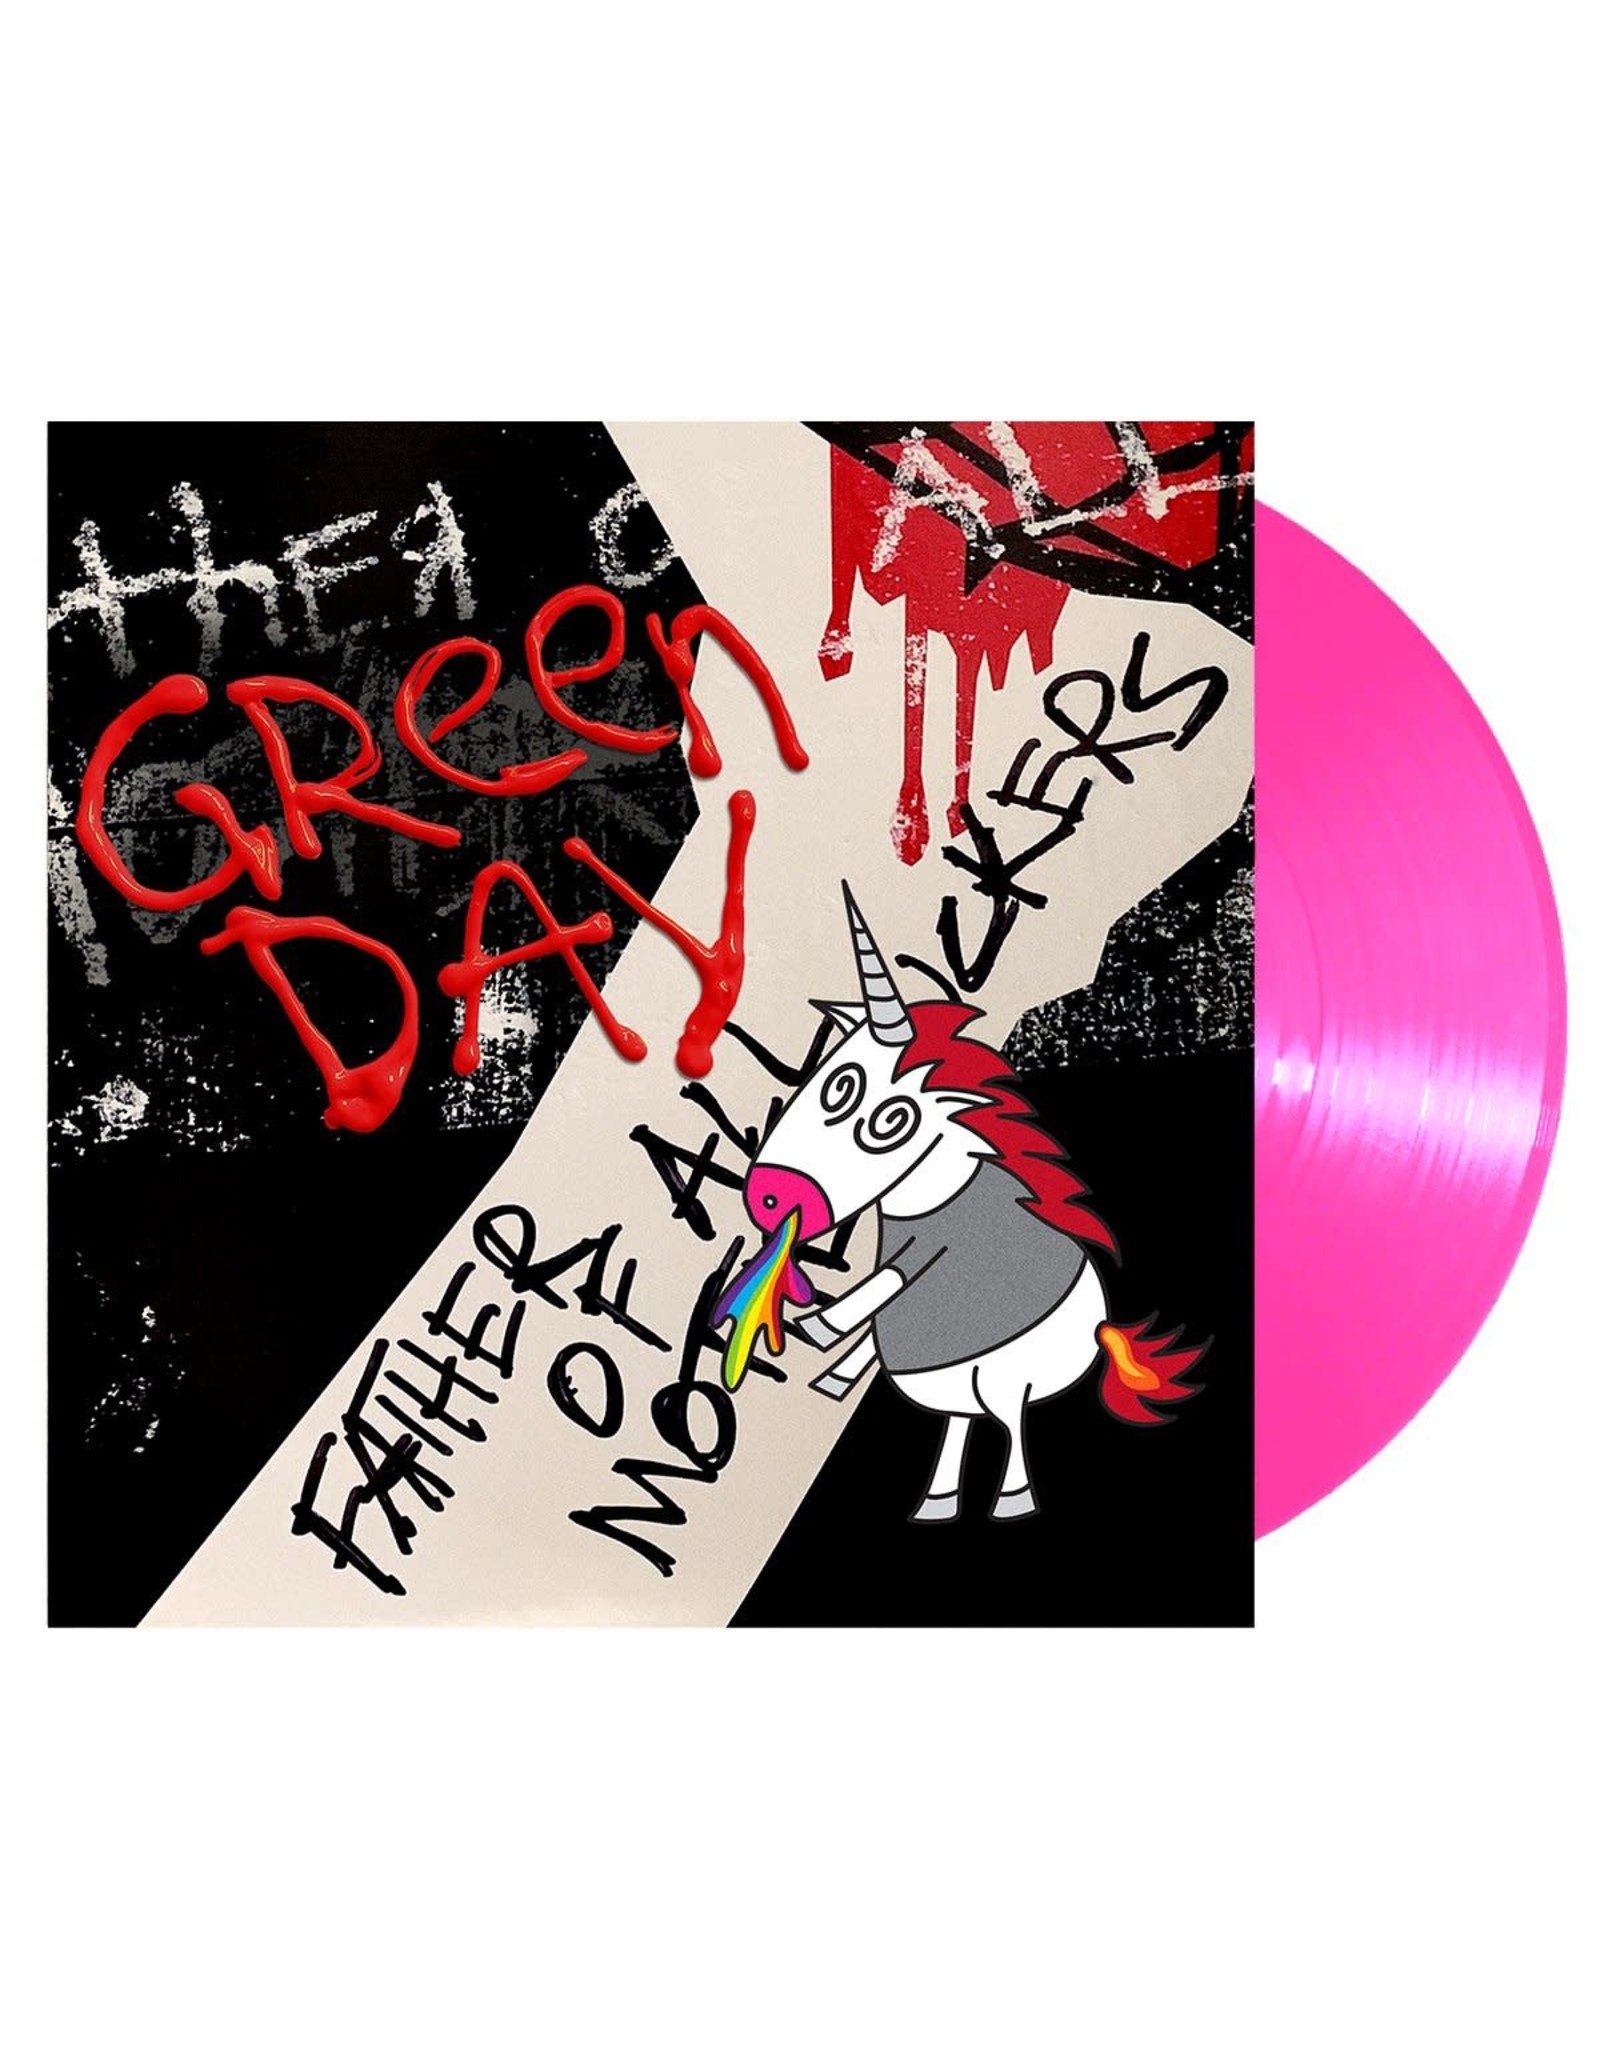 Green Day - Father of All Motherfuckers (Exclusive Neon Pink Vinyl)